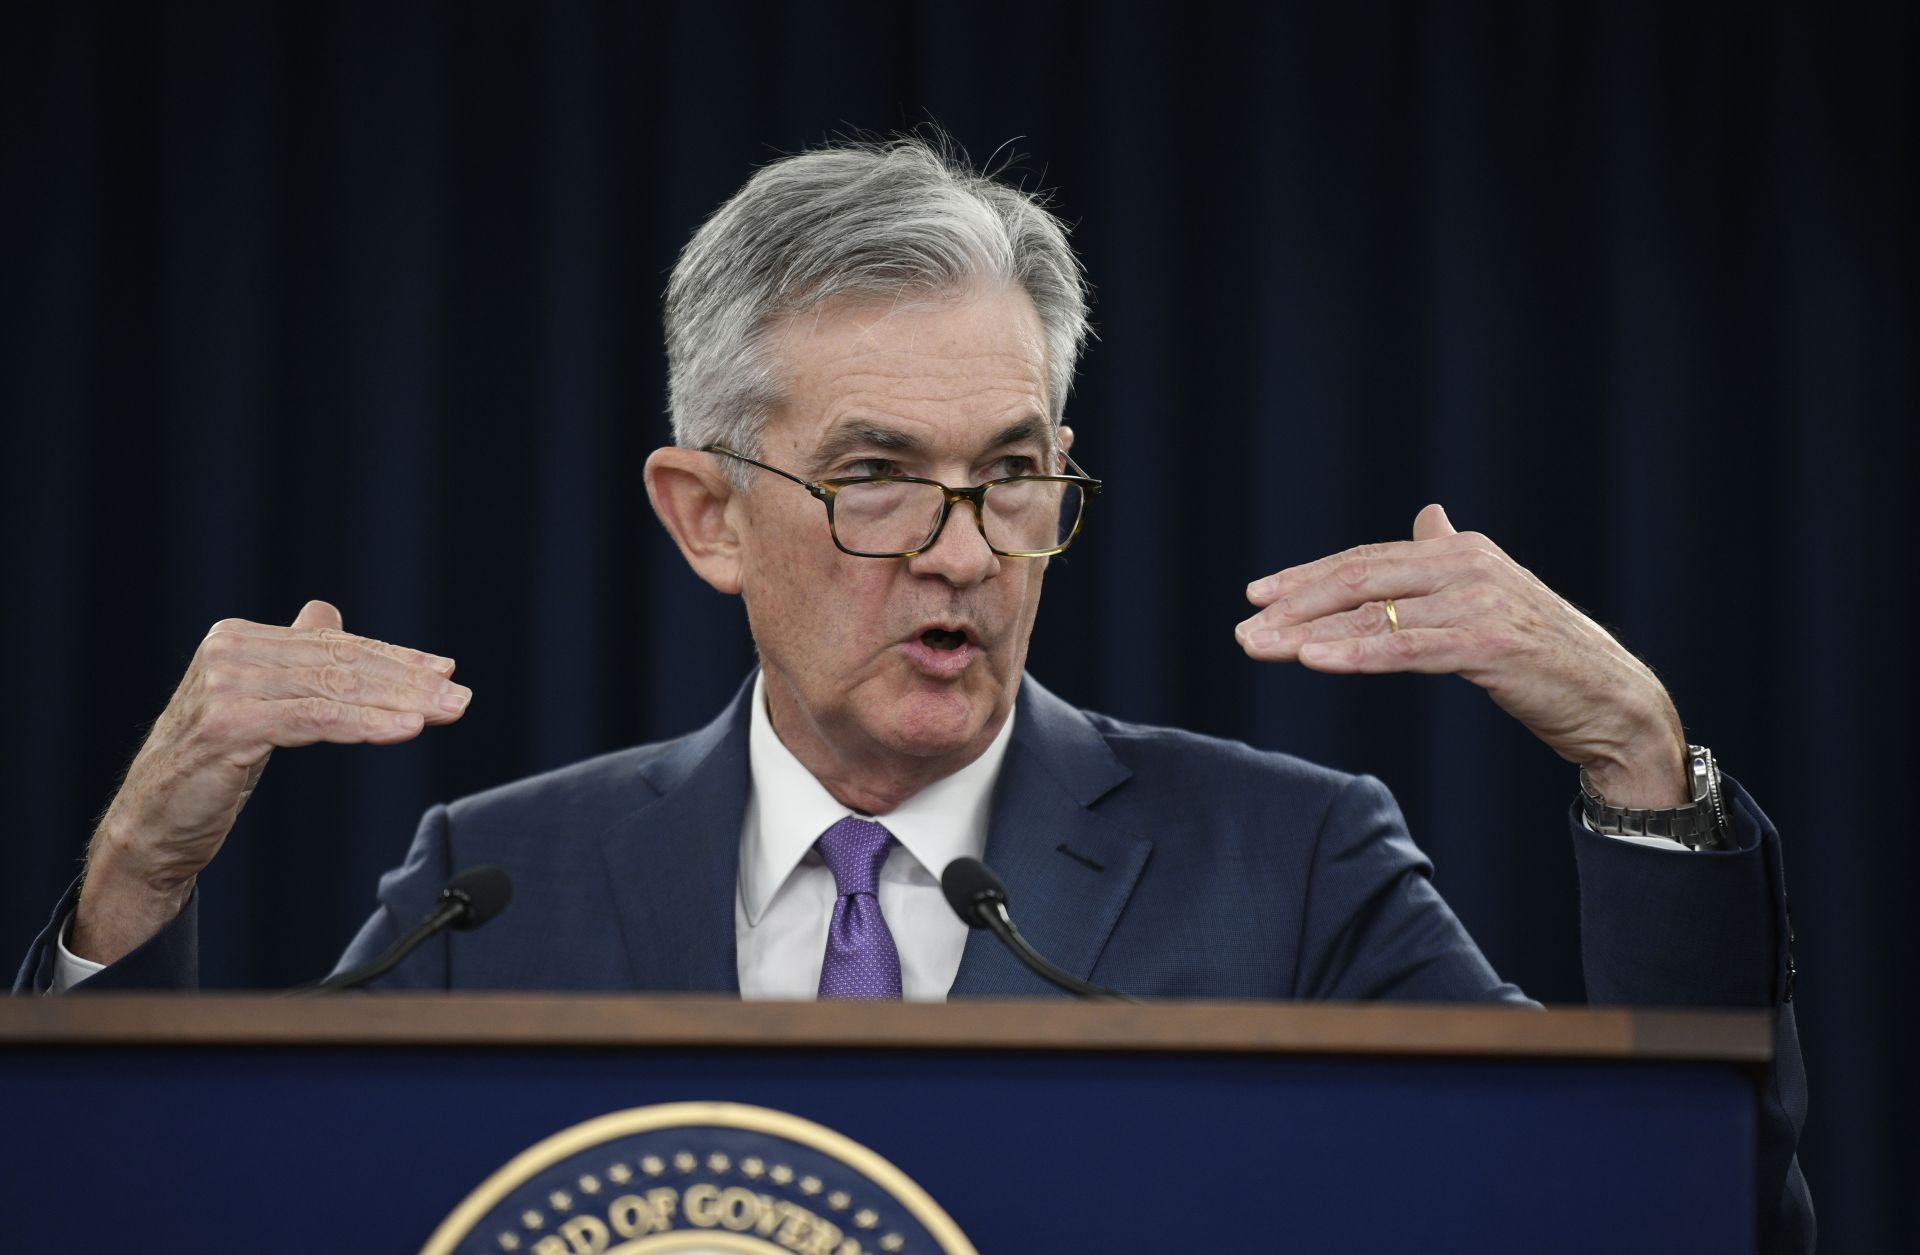 This image shows Jerome Powell, chairman of the U.S. Federal Reserve, delivering news about the central bank's decision to cut its benchmark interest rate.